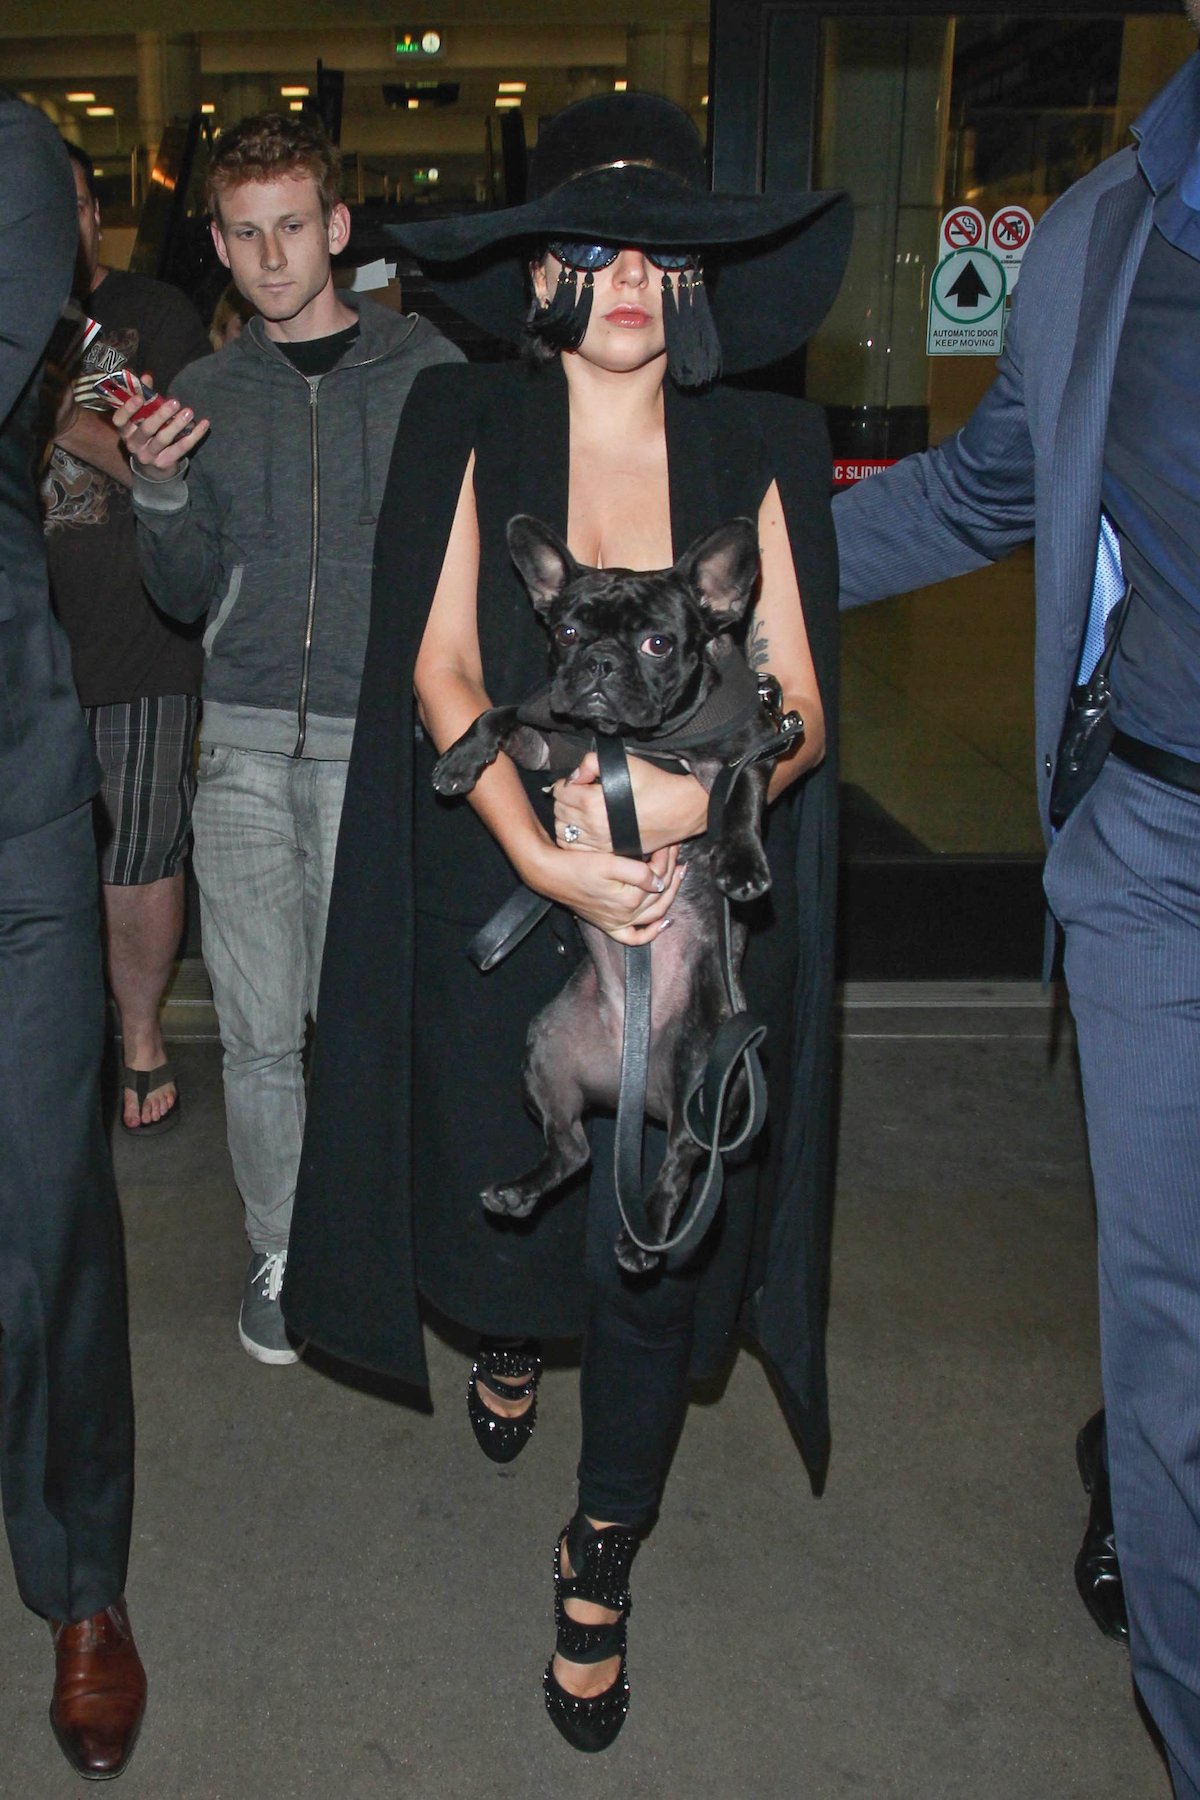 Lady Gaga in a black outfit and hat, holding a black dog.